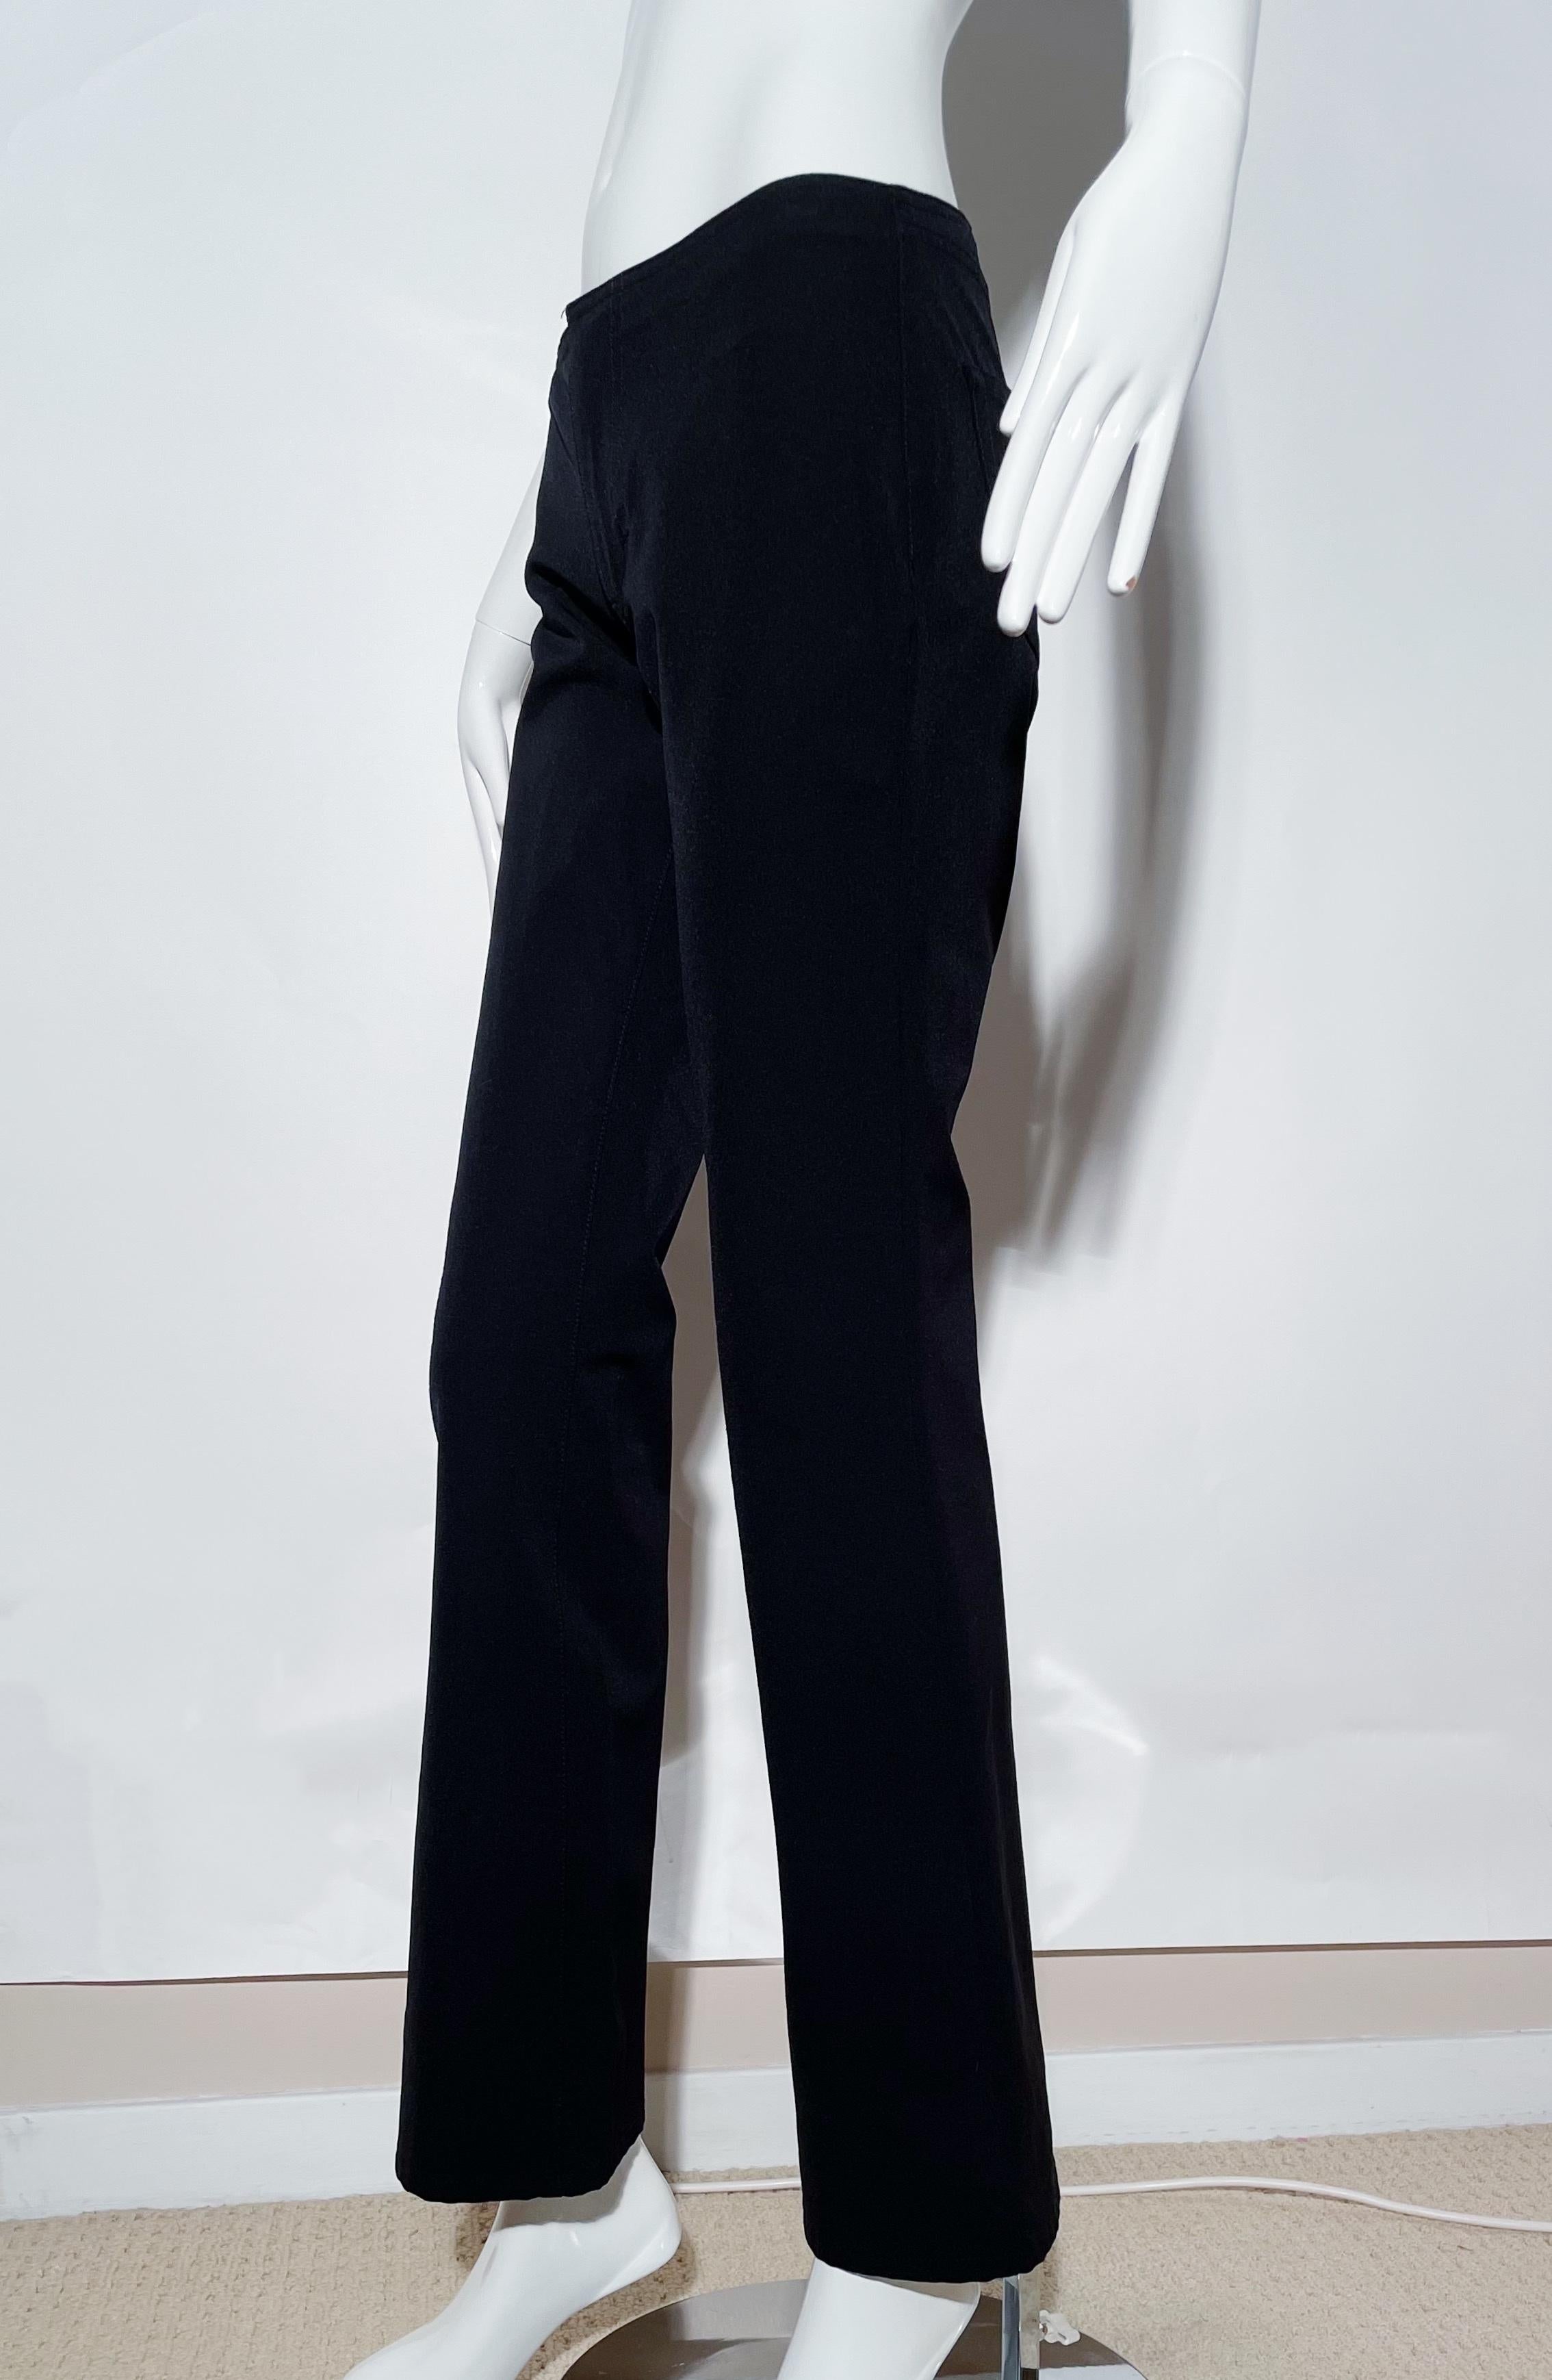 Gianfranco Ferre Low Rise Pants For Sale 2